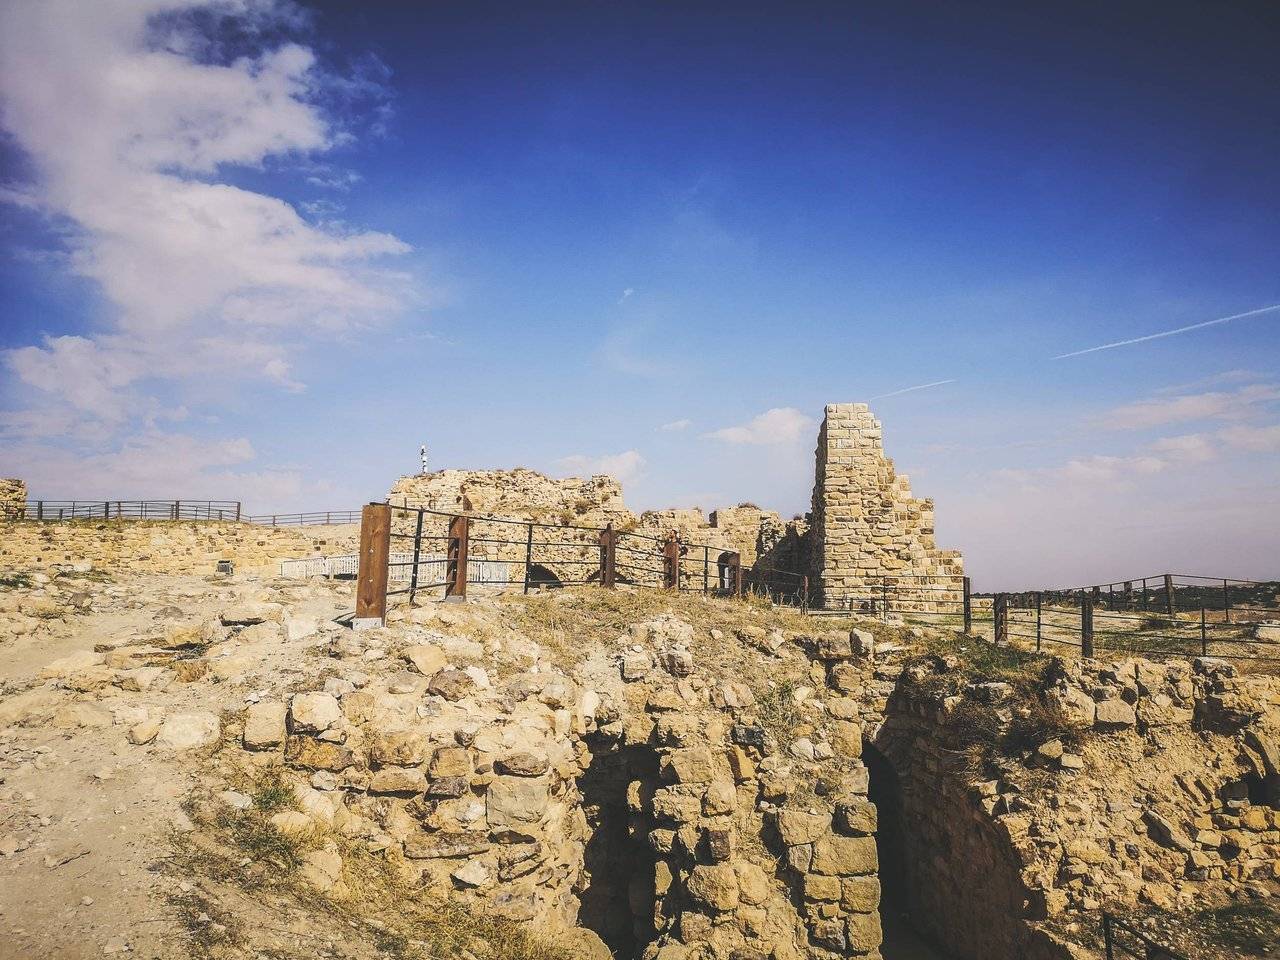   Throughout ages, the rulers of the castle built many layers on top of it. Photo by Alis Monte [CC BY-SA 4.0], via Connecting the Dots